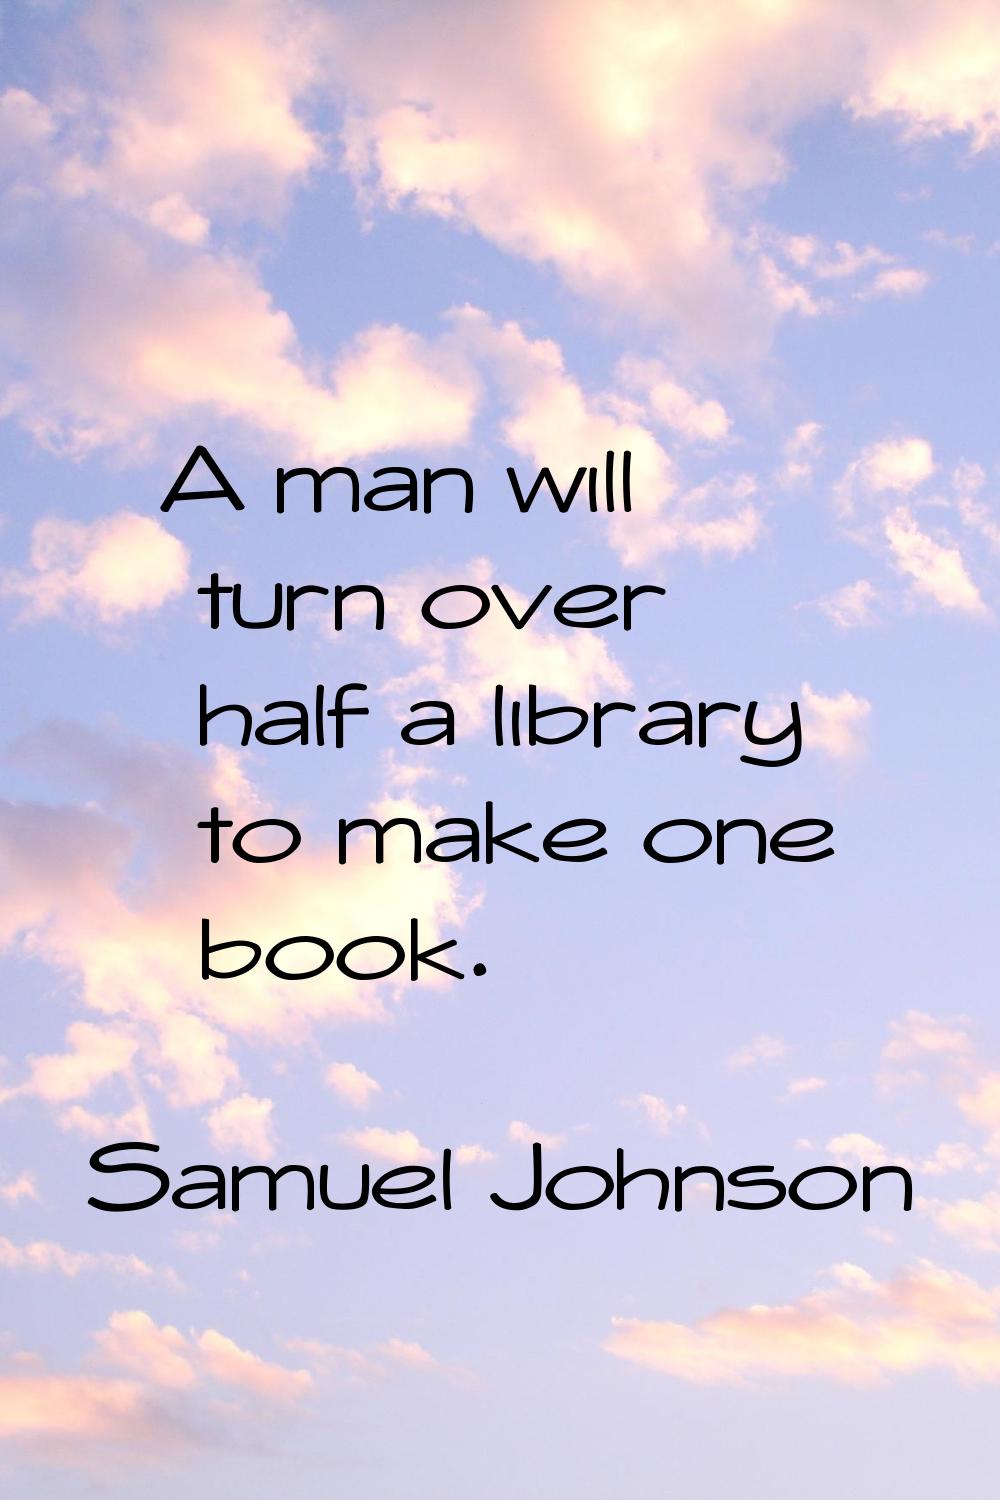 A man will turn over half a library to make one book.